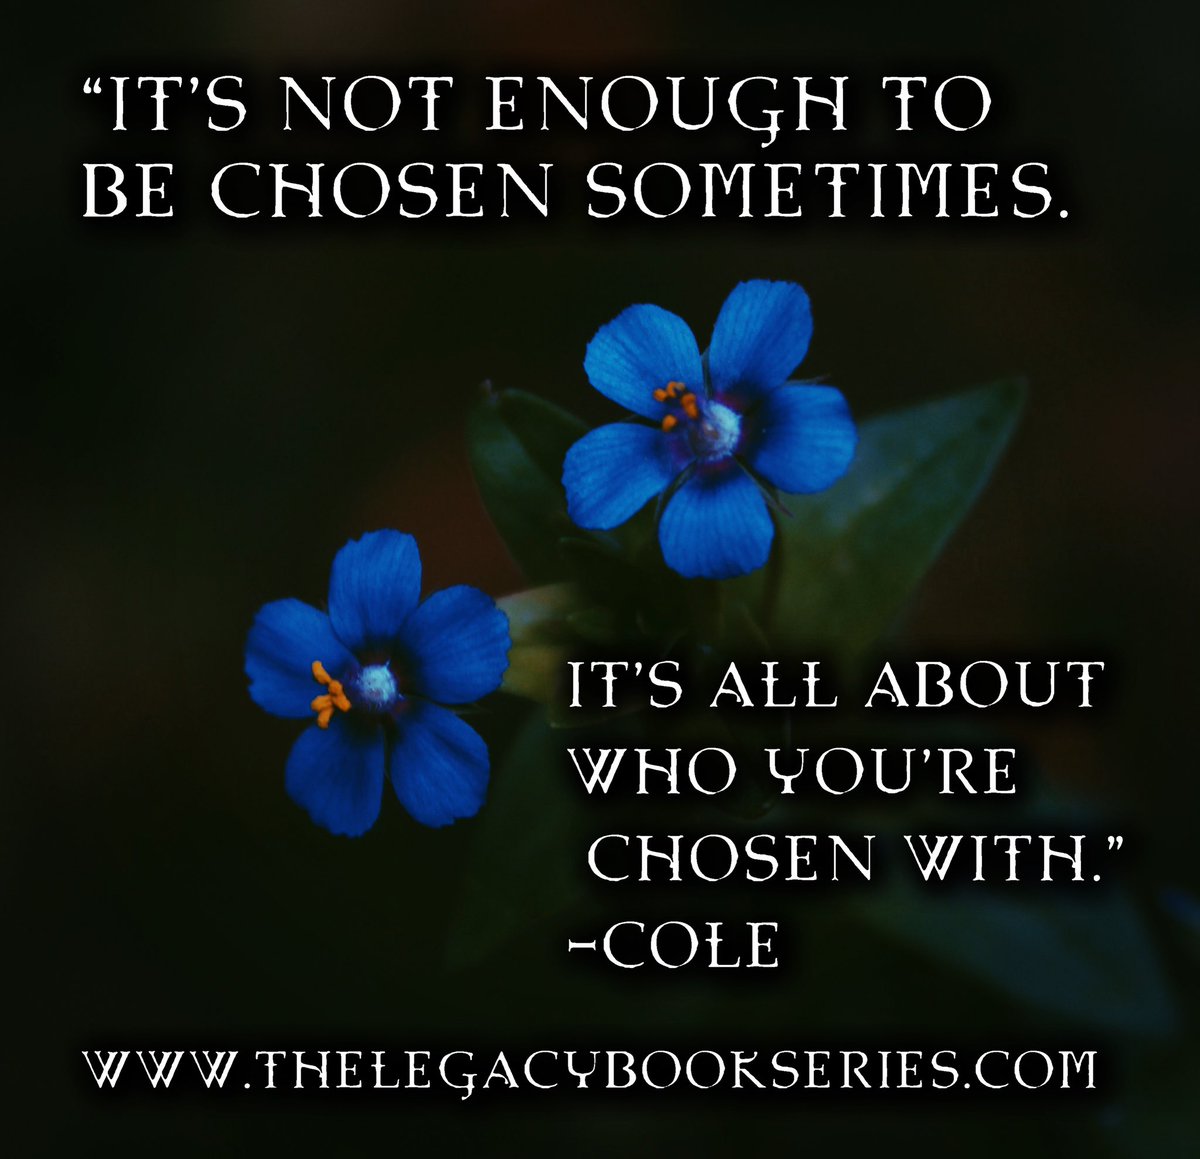 thelegacybookseries.com

#TheLegacy #BookSeries #DystopianFiction #YoungAdultBooks #IndieAuthor #SelfPublished #WritingCommunity #ThePreparations #ColeQuote #BookQuote #EpicQuote #Myra #Cole #NotEnough #NeverEnough #Chosen #TheChosen #TheLegacyBookSeries #ReadingCommunity